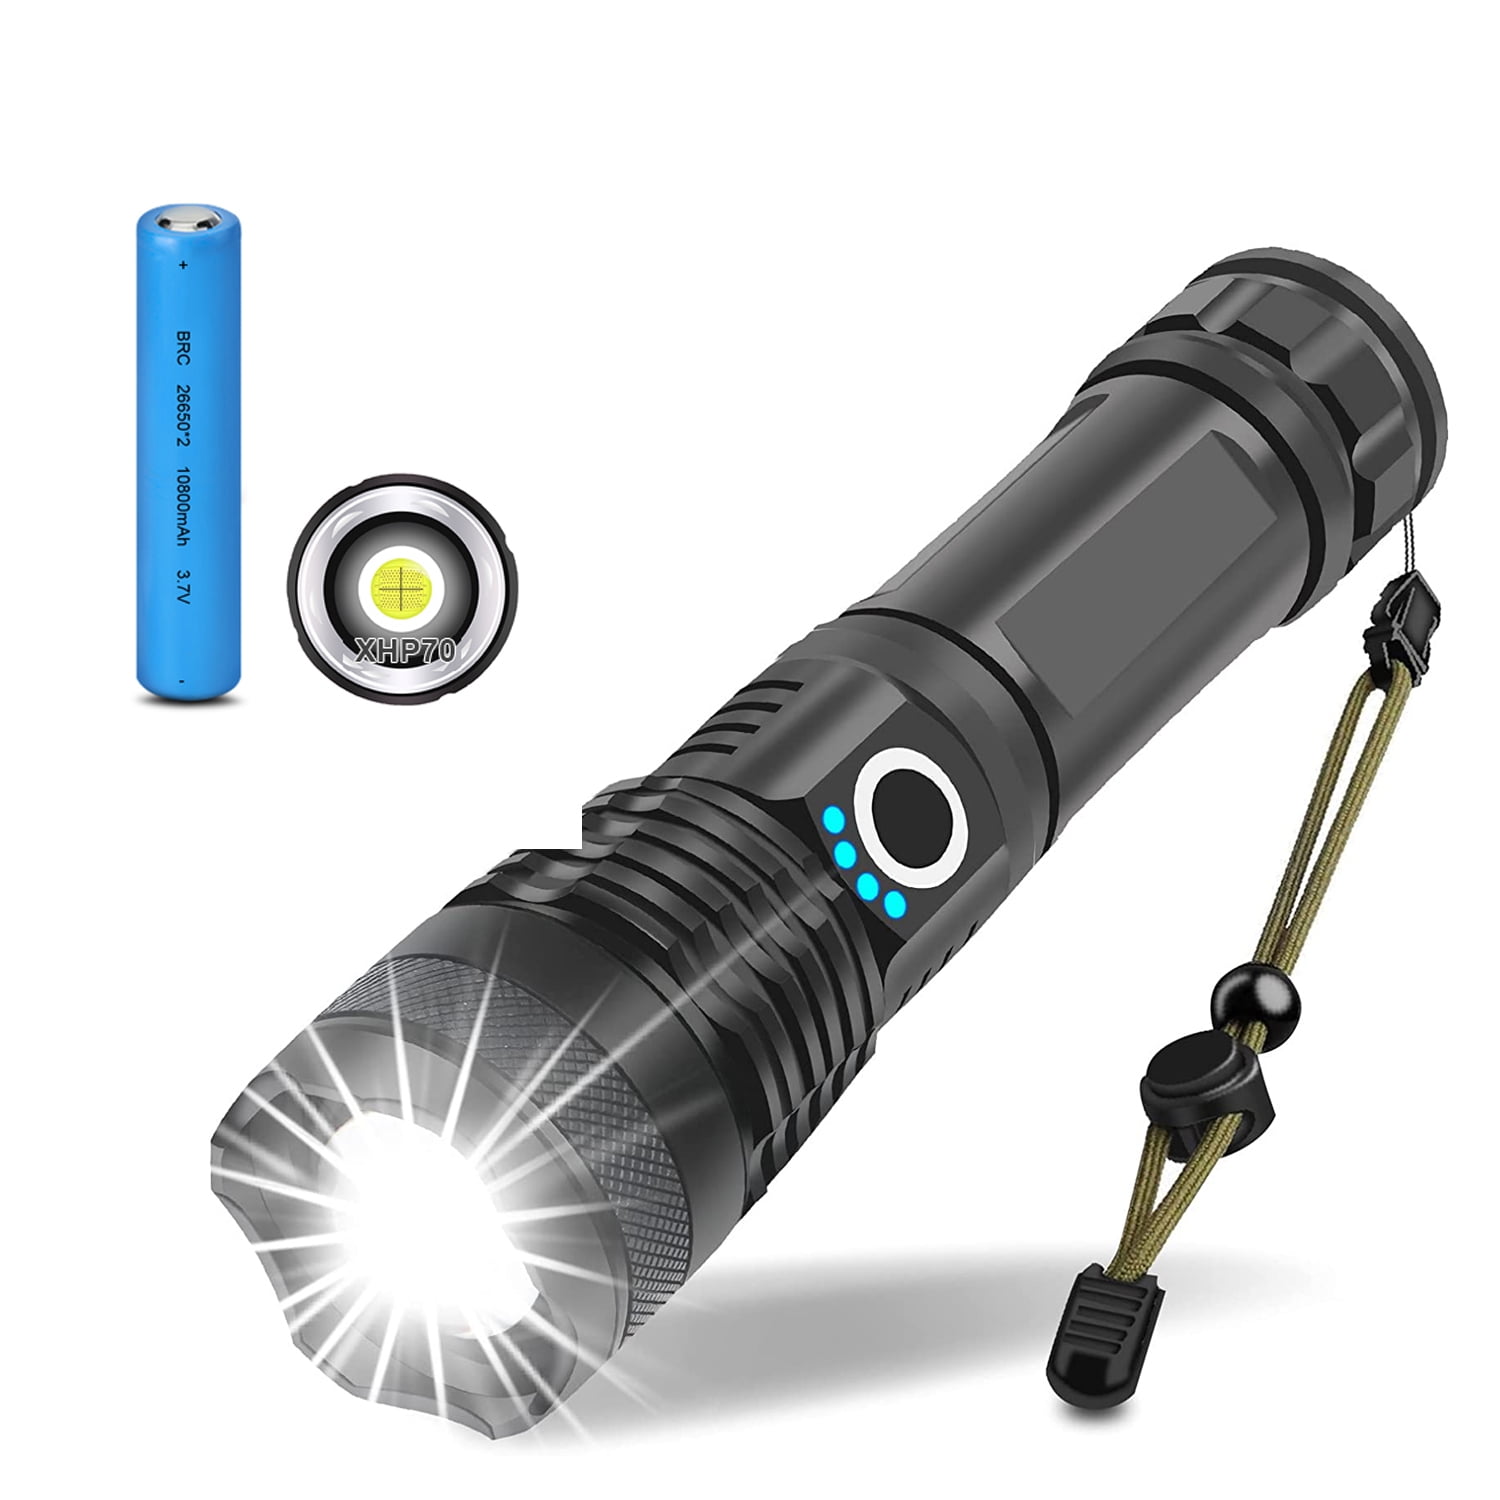 990000Lumens Super Bright Camping Hiking Flashlight T6 LED Police Tactical Torch 